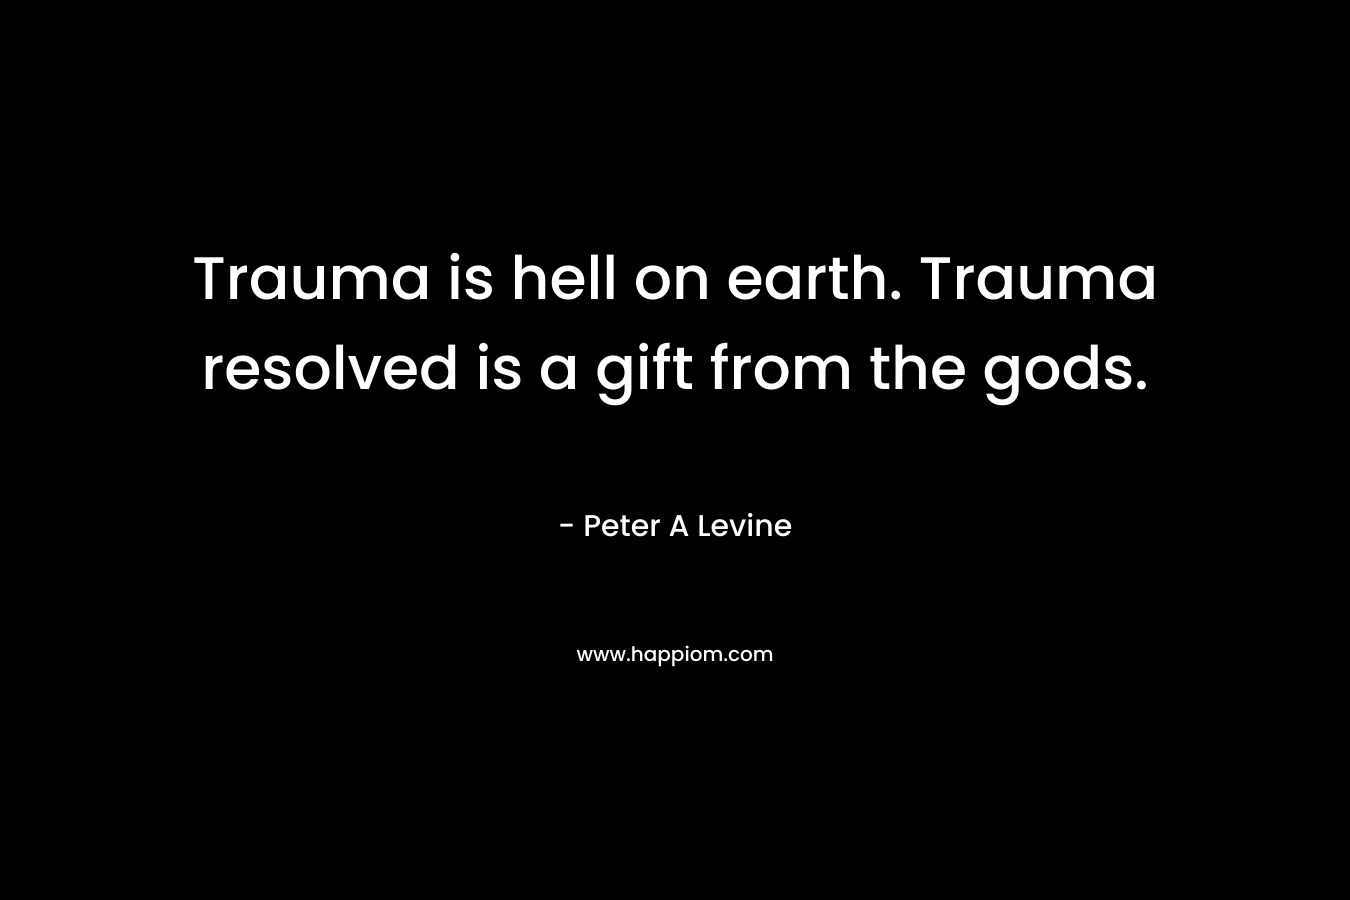 Trauma is hell on earth. Trauma resolved is a gift from the gods.